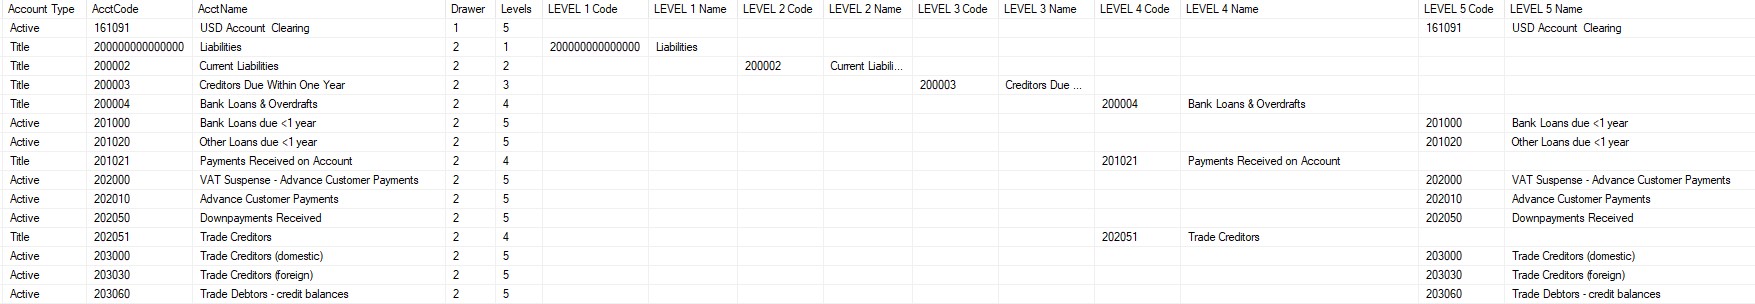 SQL Query output of SAP Chart of Accounts 